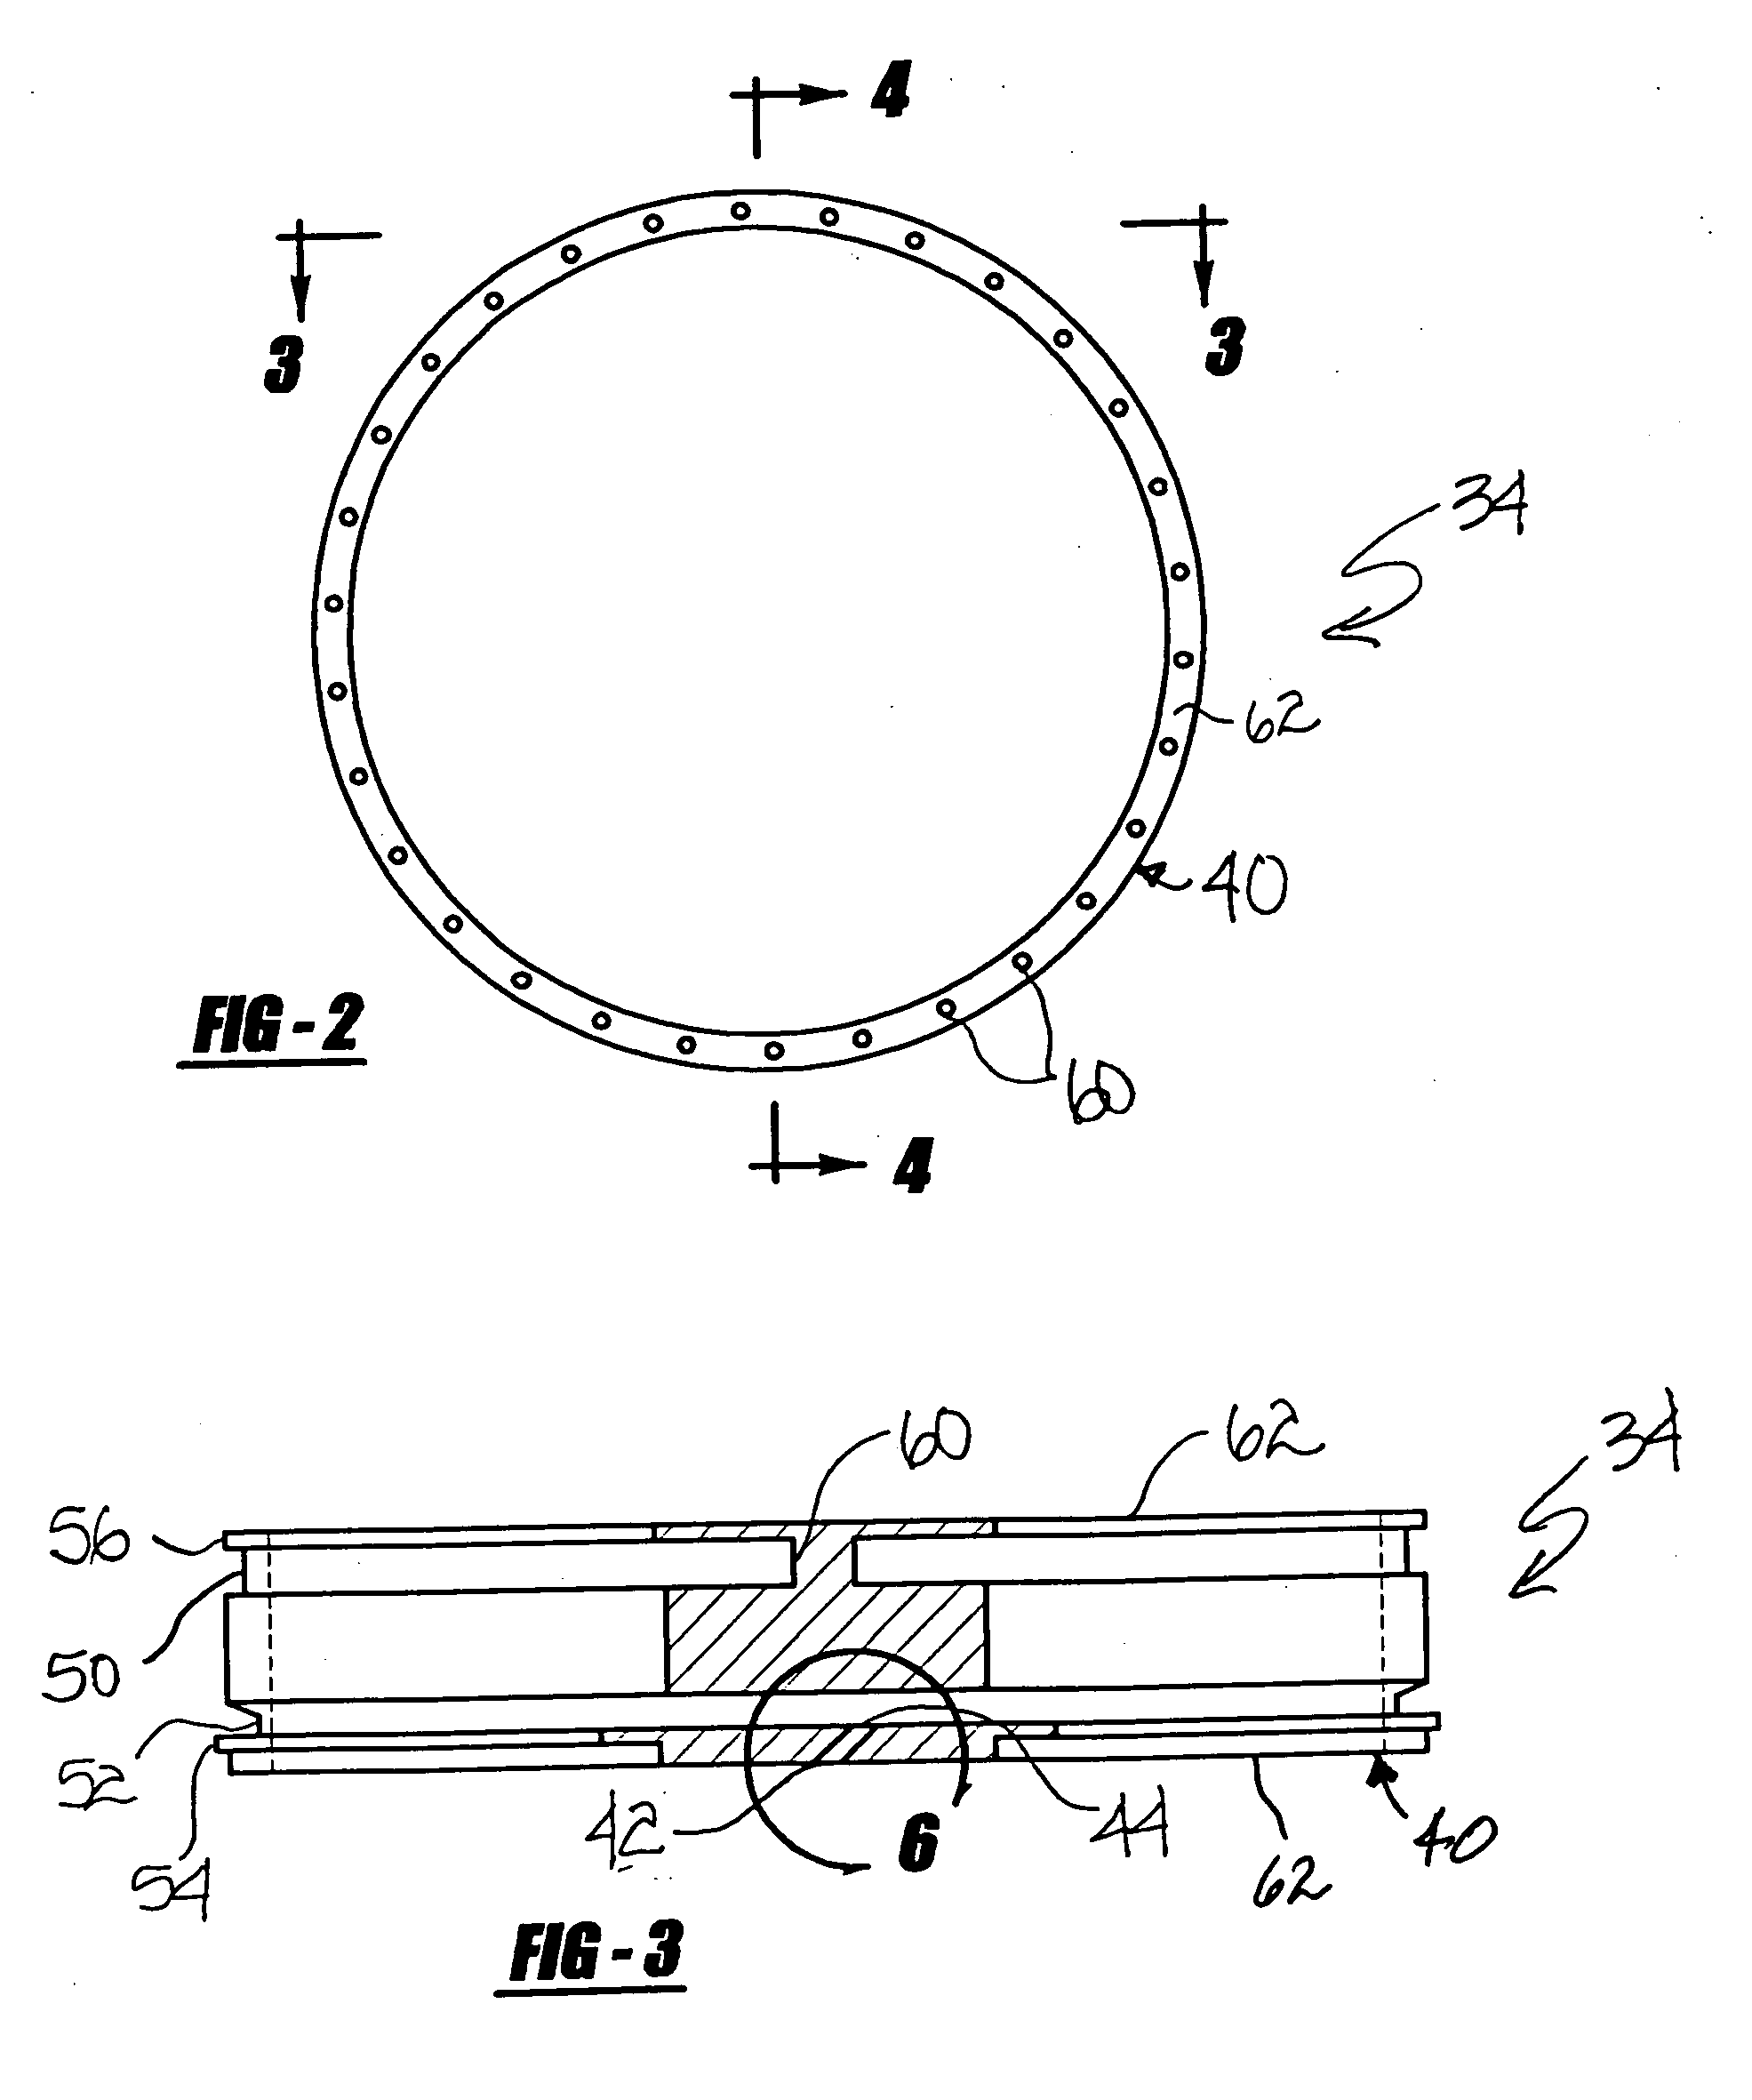 Apparatus and method for a rotary atomizer with improved pattern control